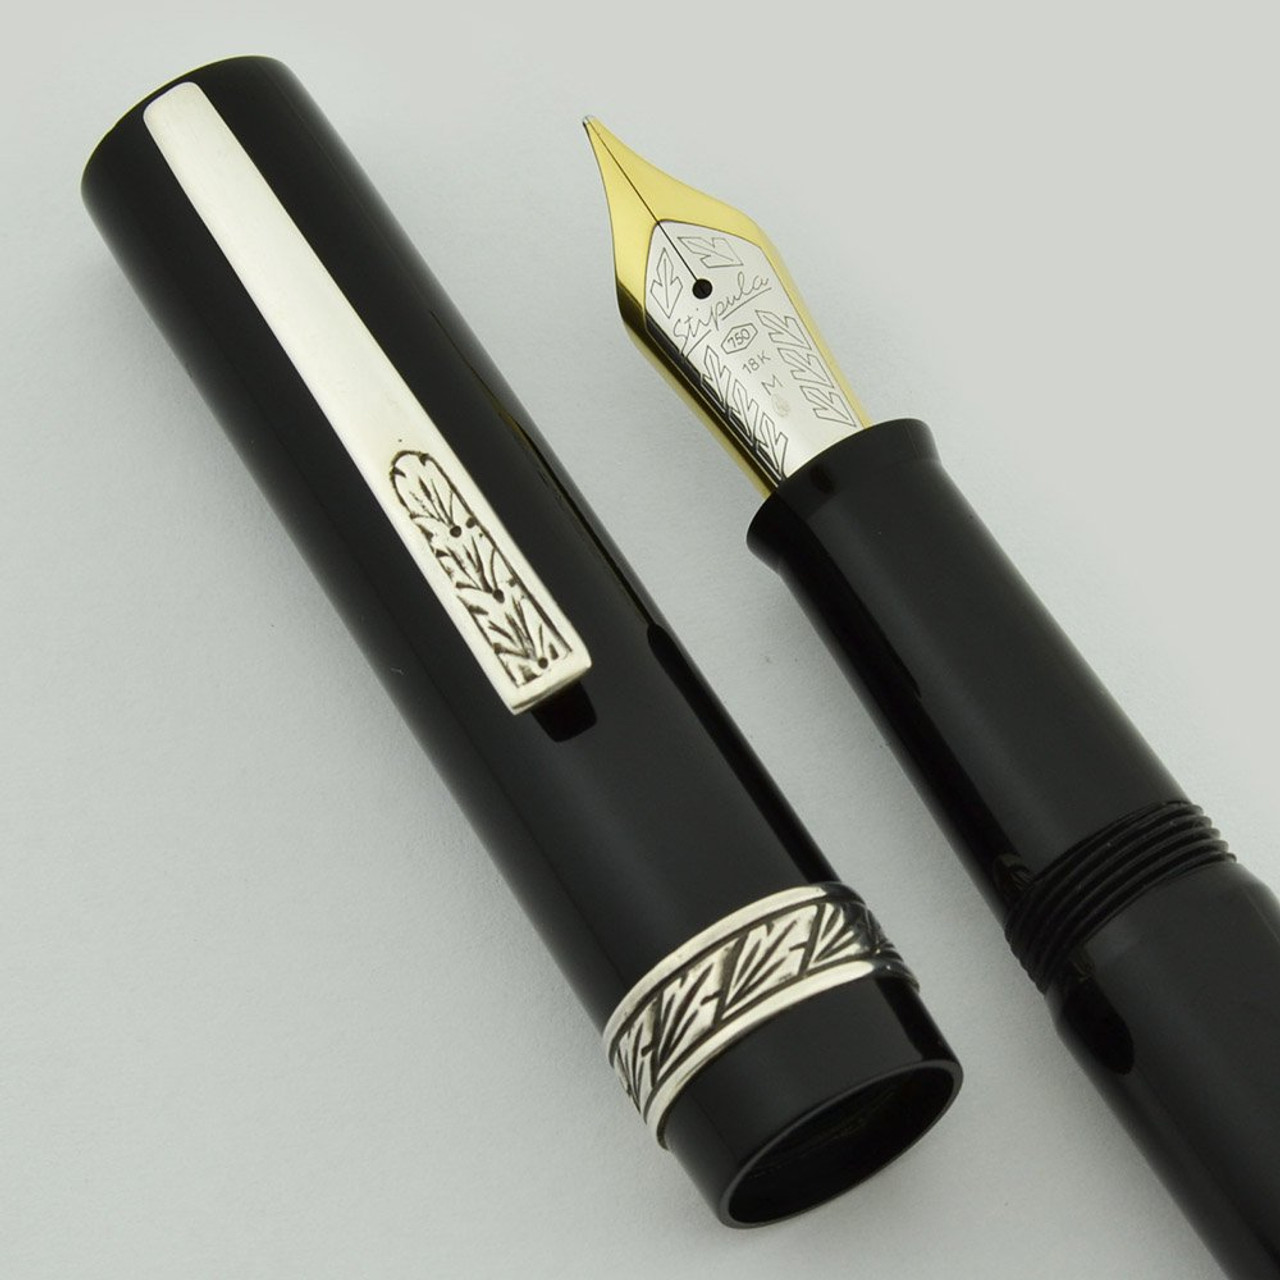 Stipula Florentia Fountain Pen - Large Size, Black Celluloid, Sterling Trim, 18k Medium Nib (Excellent + in Box, Works Well)